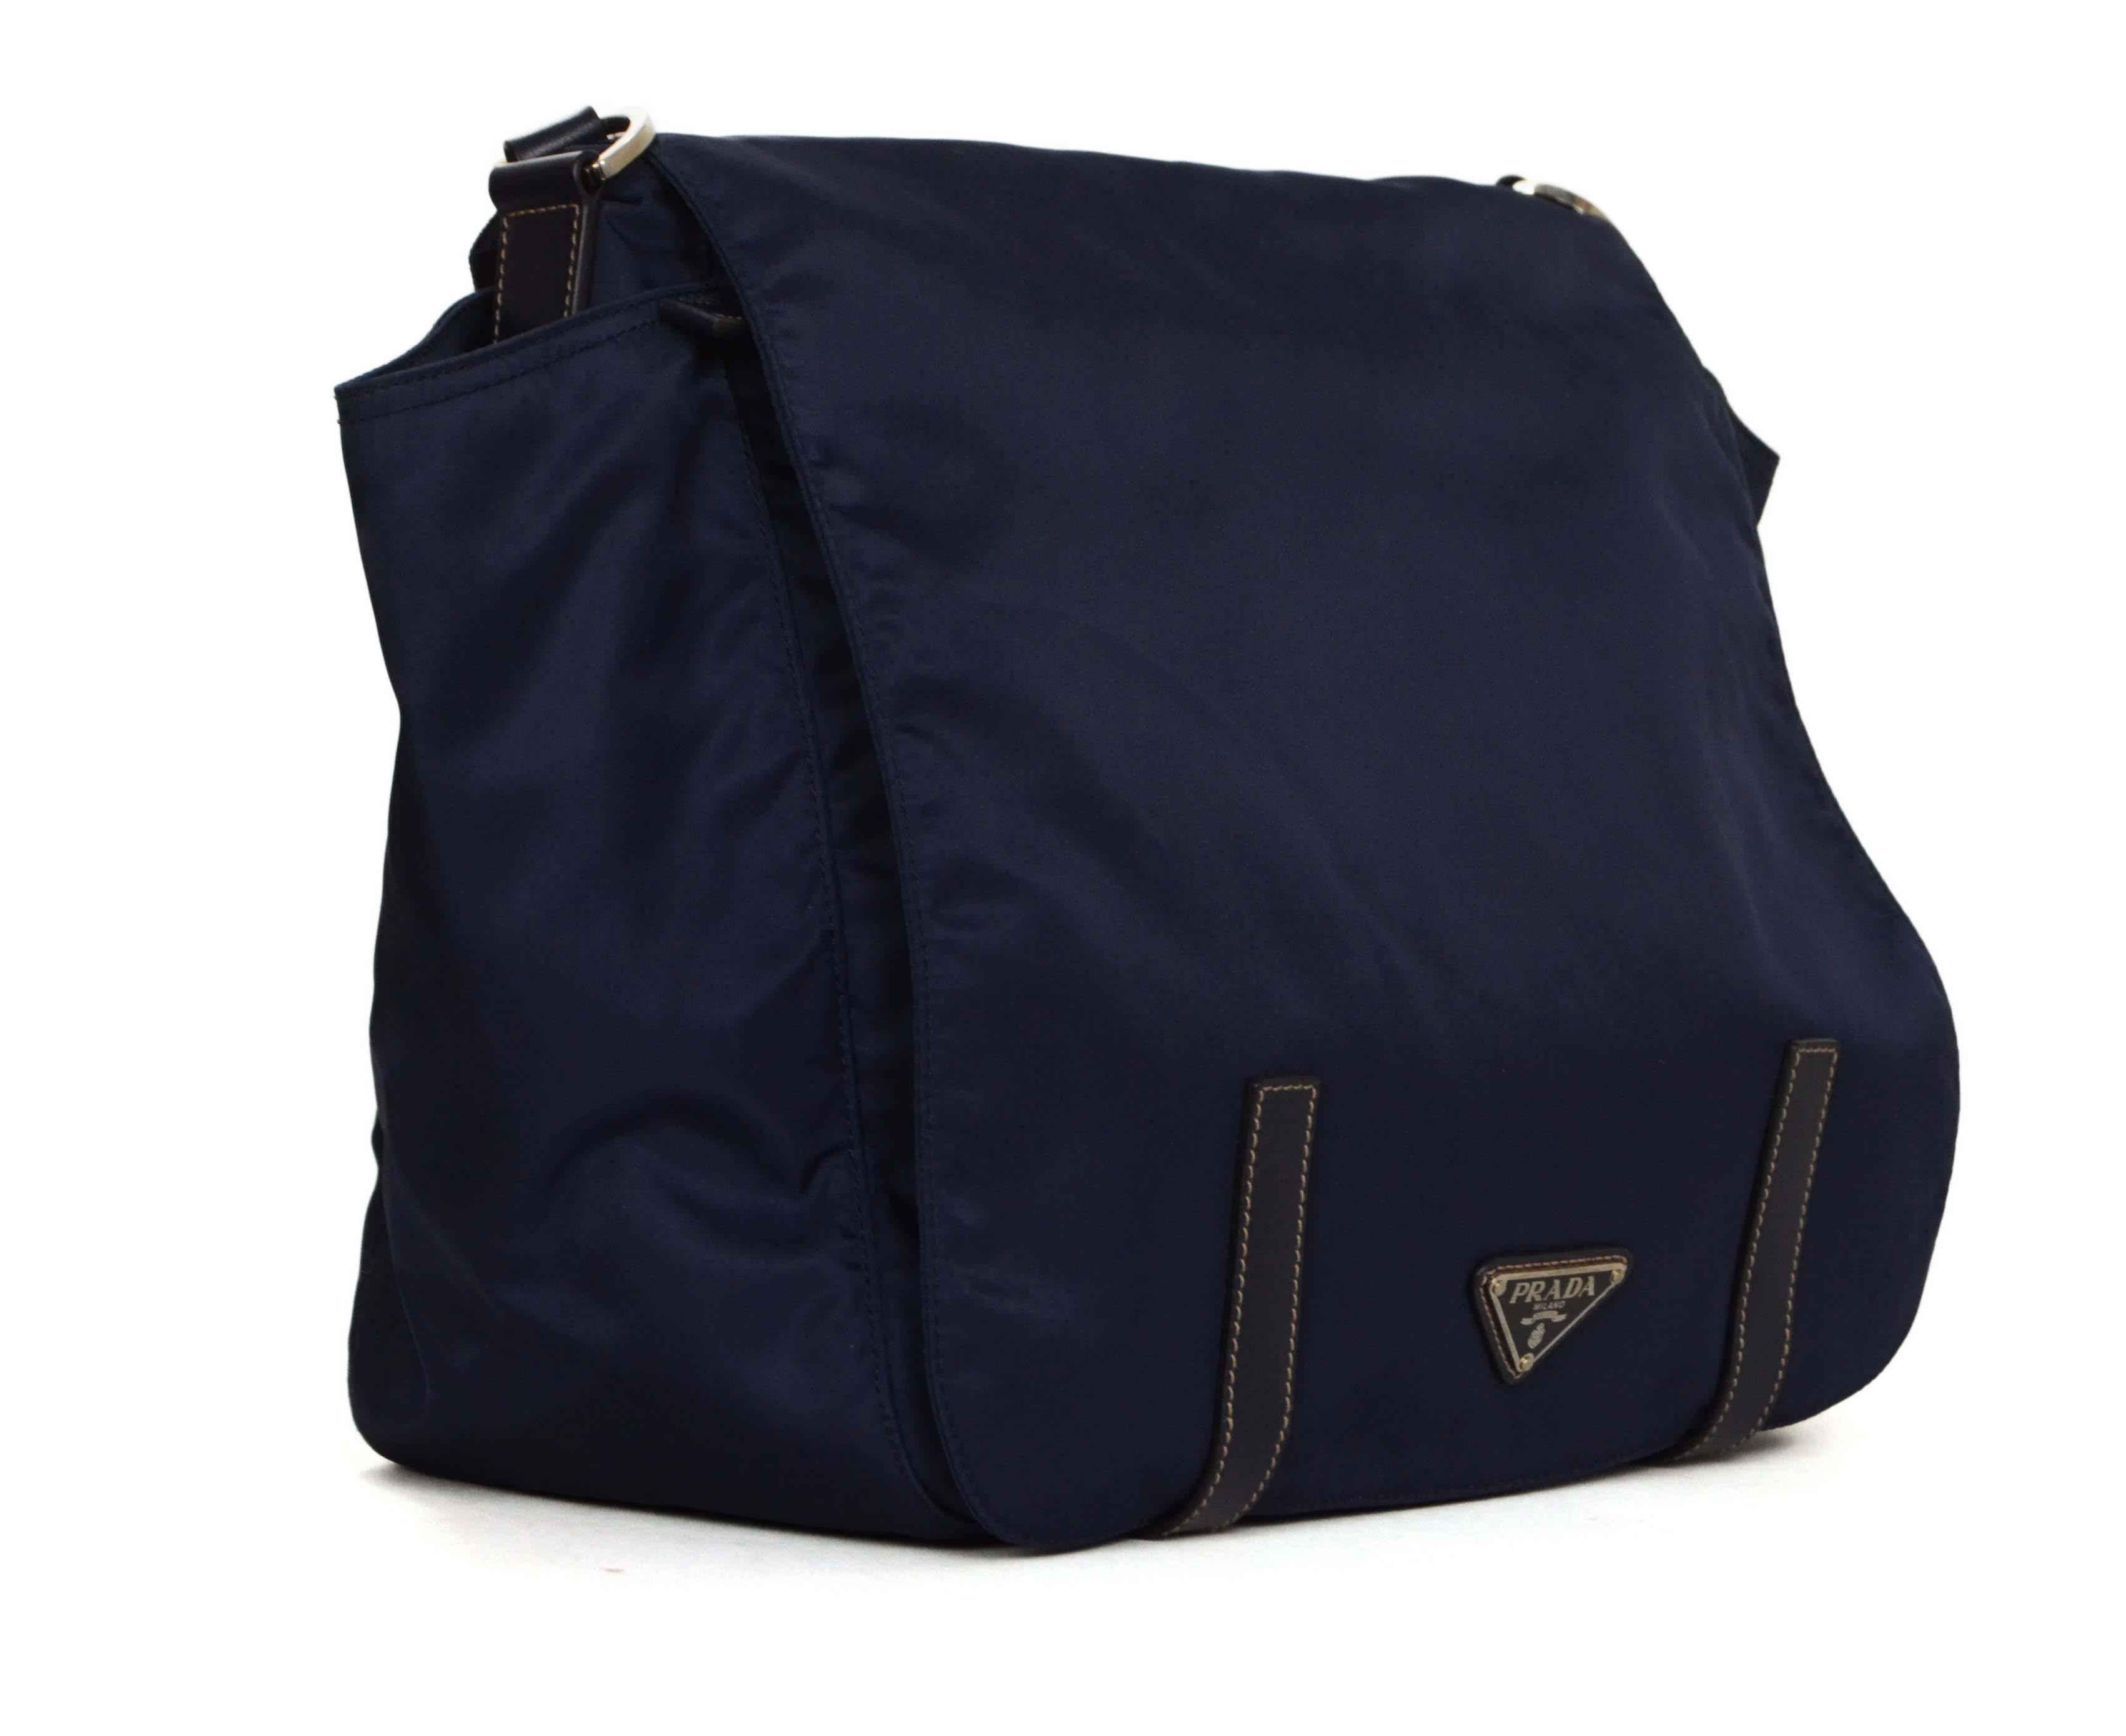 Features flap closure with two side pockets and adjustable strap
-Made In: Italy
-Color: Navy blue
-Hardware: Silvertone
-Materials: Nylon with leather strap closure
-Lining: Black monogram textile
-Closure/Opening: Zip top covered by flap